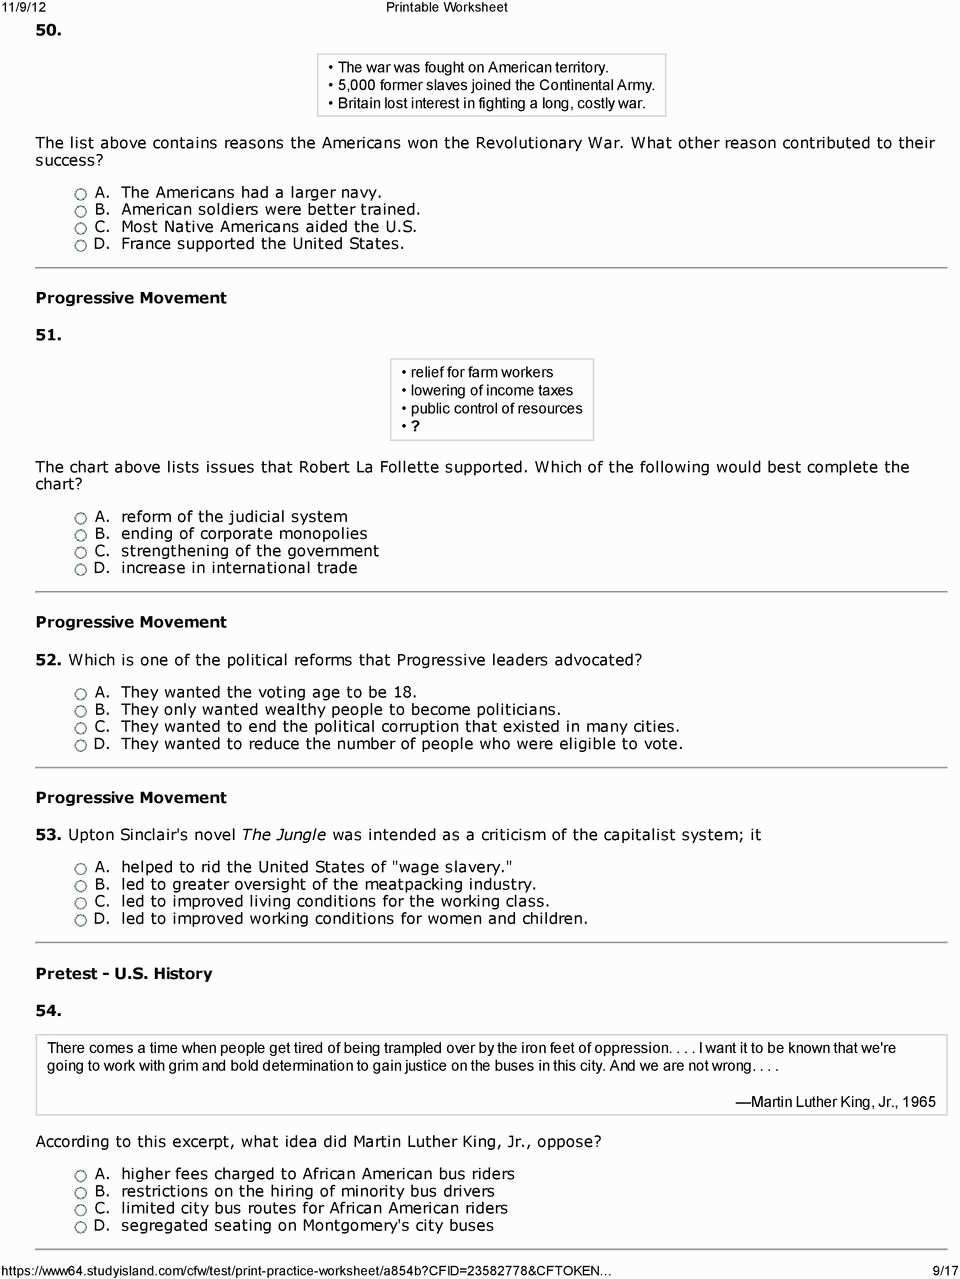 america-the-story-of-us-civil-war-worksheet-answer-key-db-excel